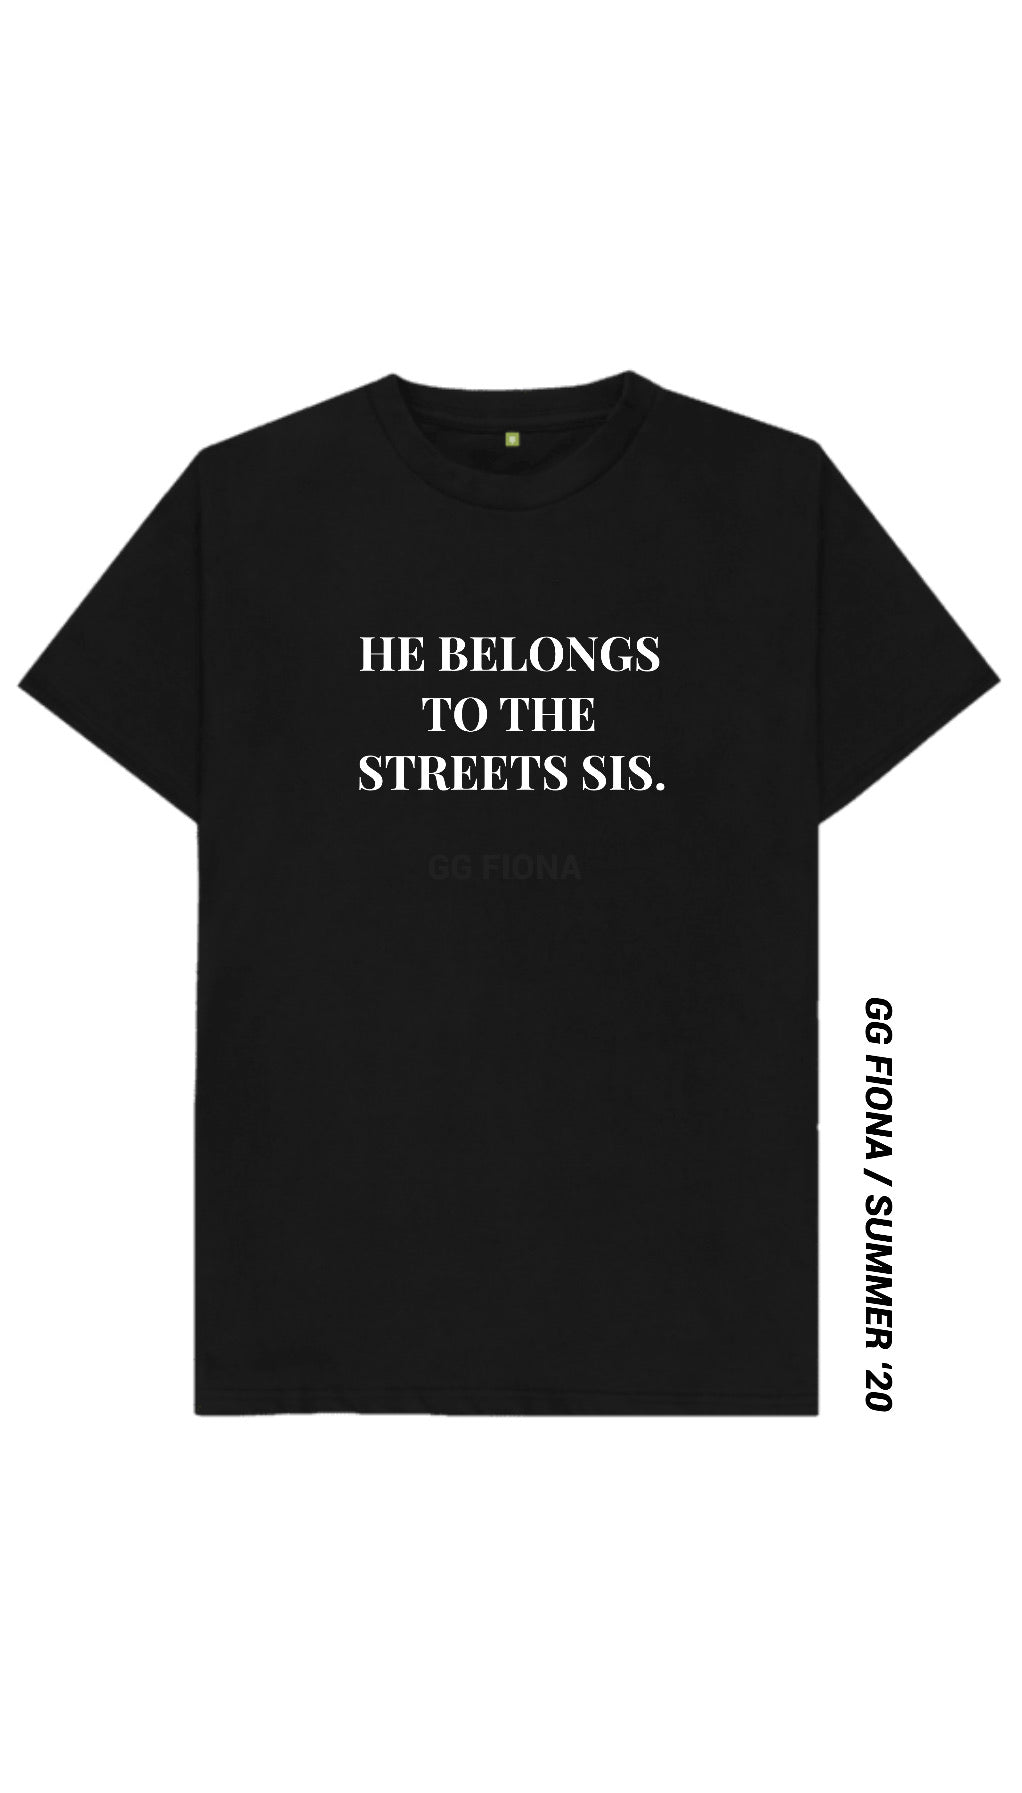 He belongs to the streets sis Tee Preorder allow 5 business days before ship - ggfiona